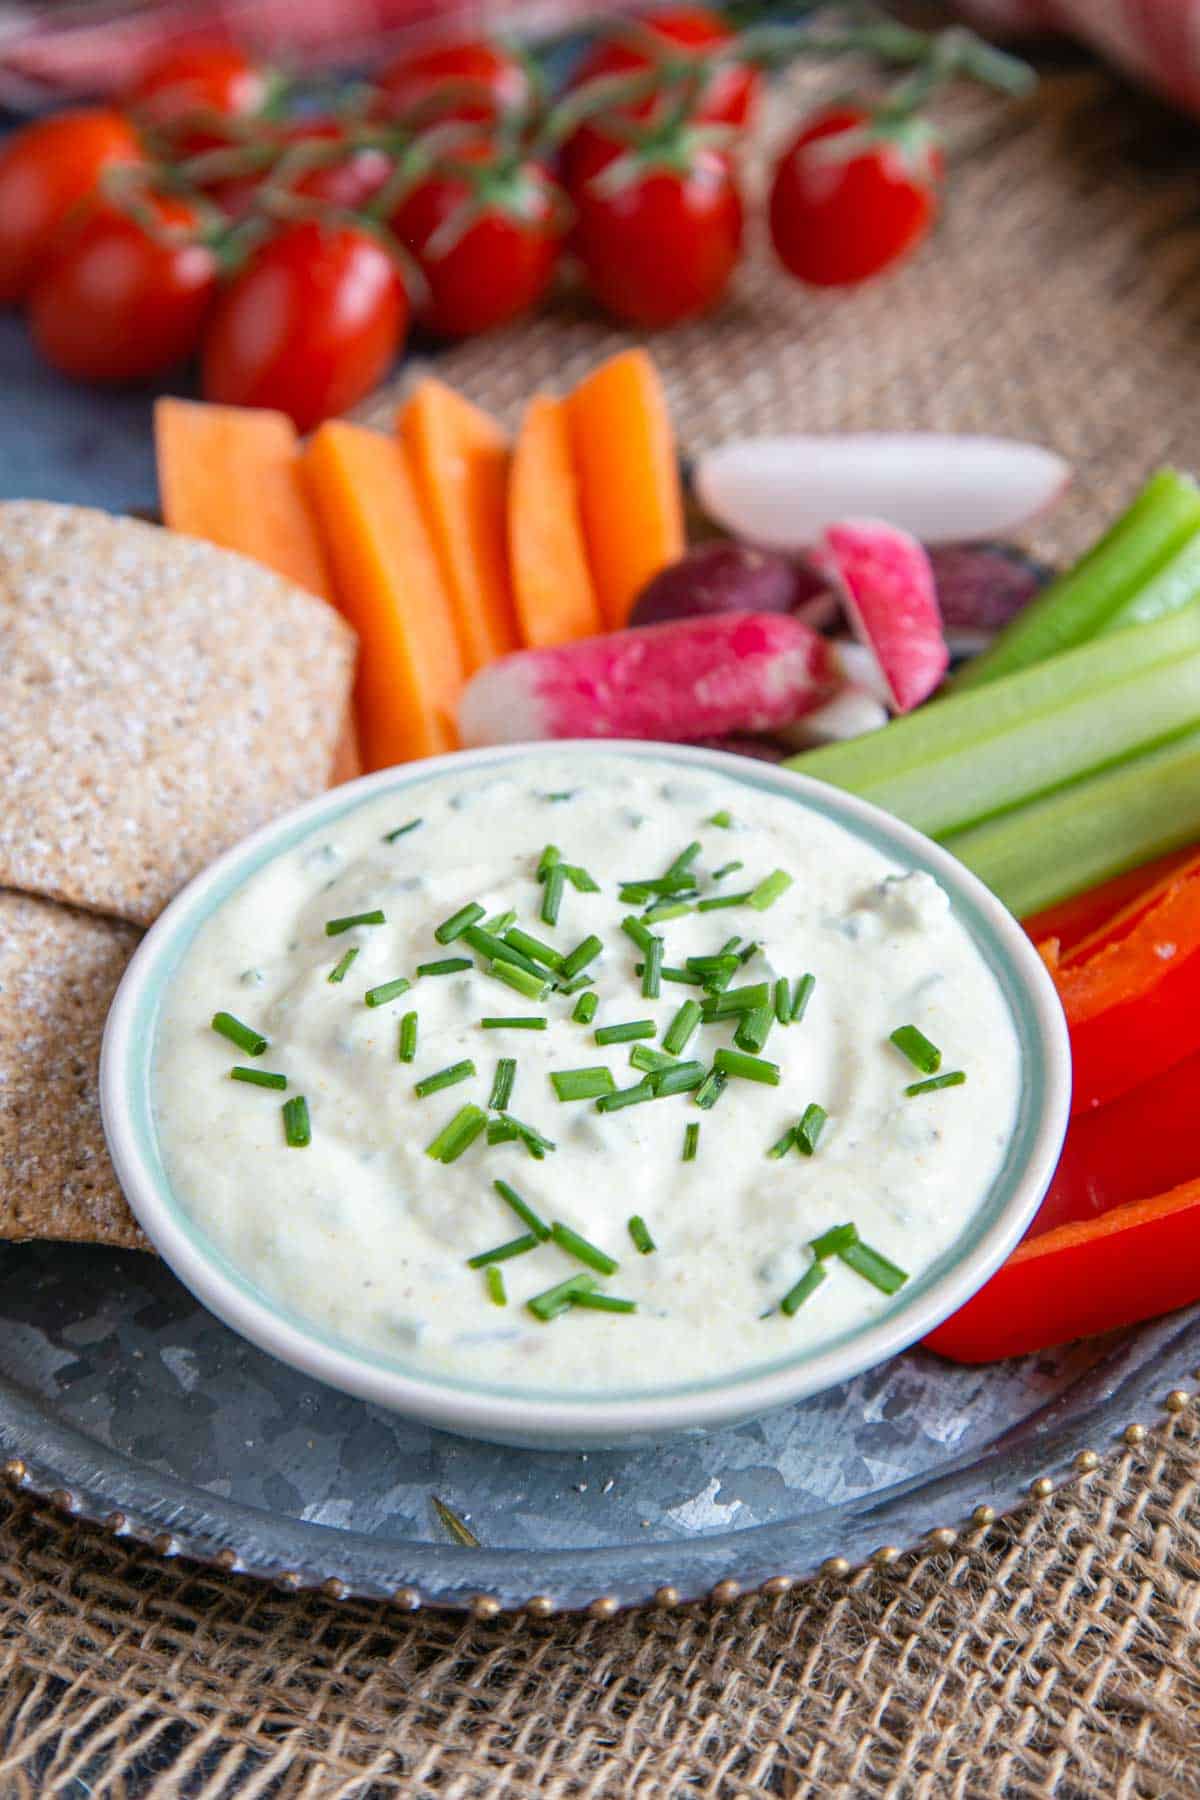 Rich and creamy cheese and chive dip is perfect with all your favourite snacks.